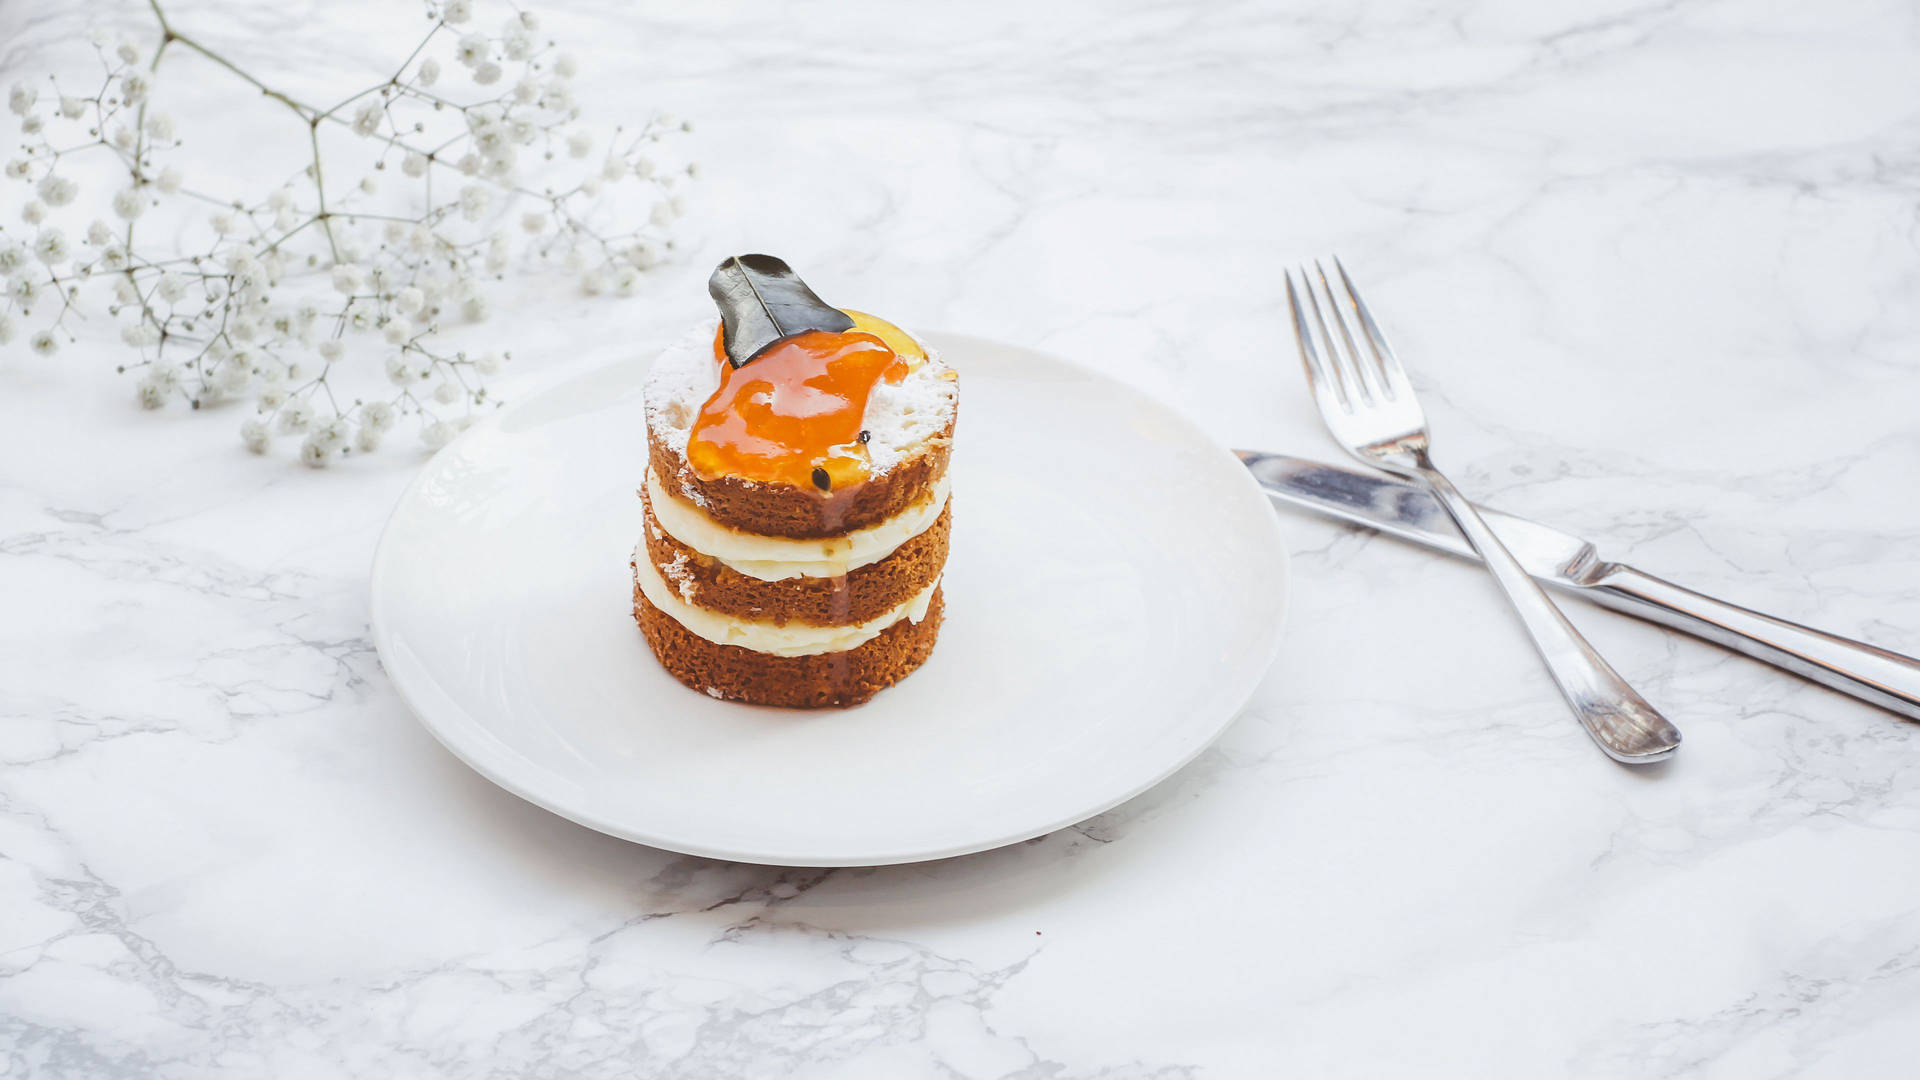 A Sumptuous Slice of Carrot Cake Wallpaper